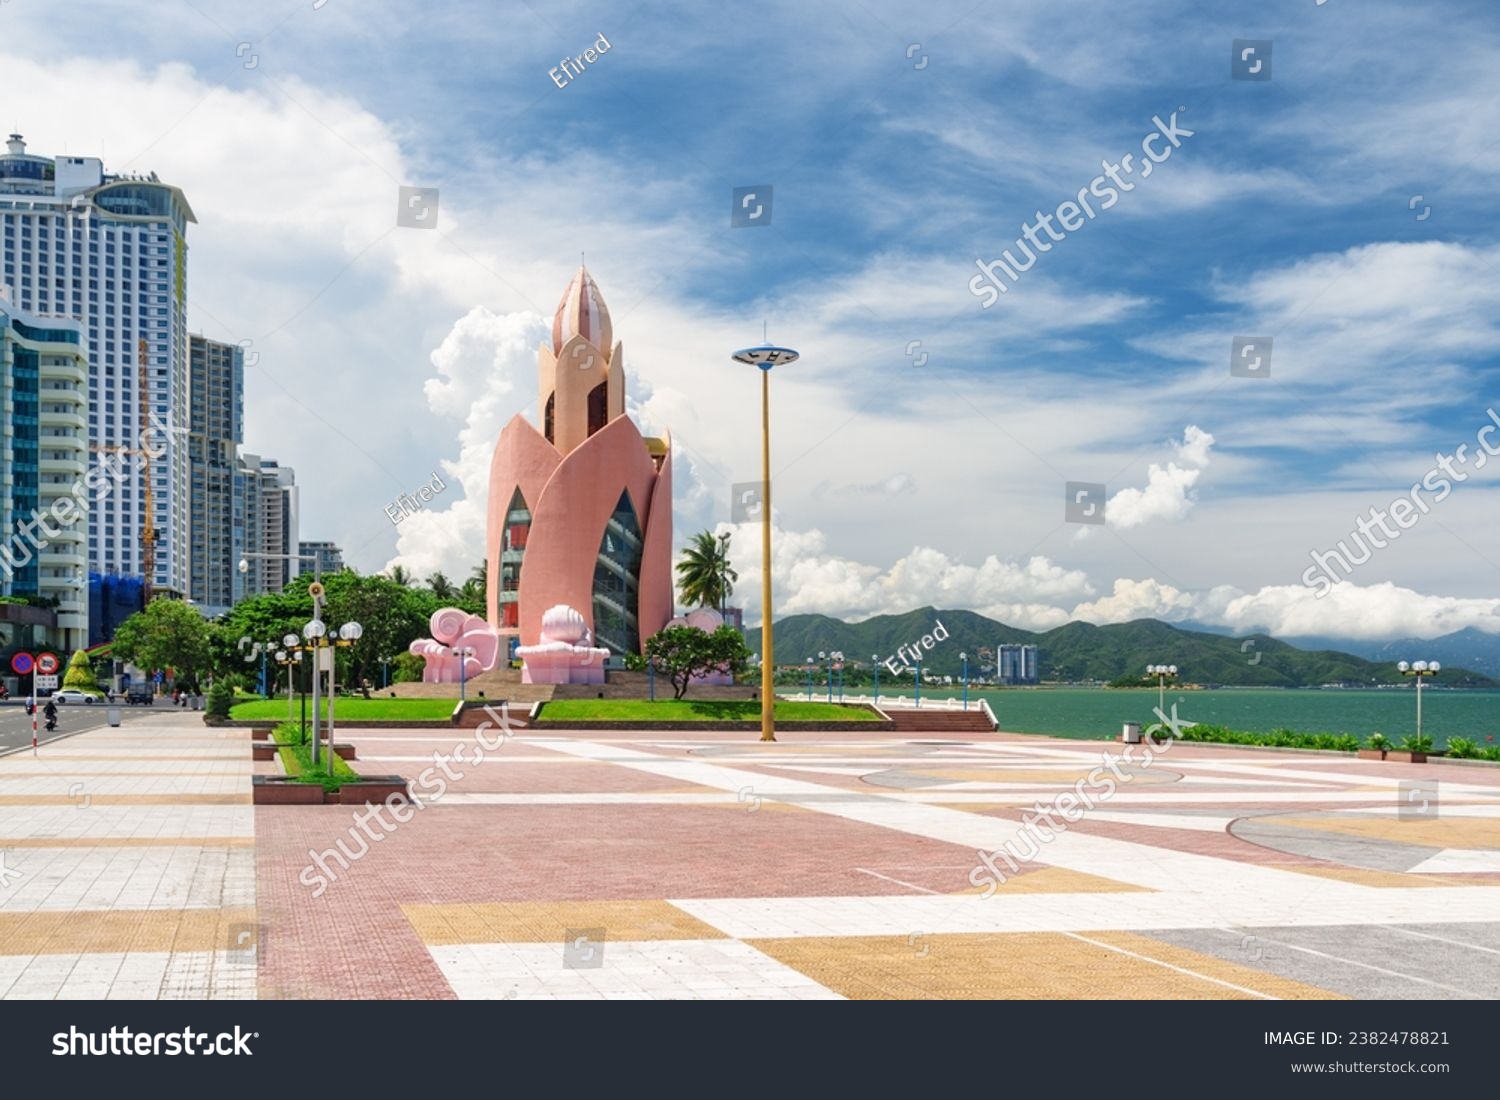 Awesome view of Tram Huong Tower and April 2 Square in Nha Trang, Vietnam. The central square is a popular tourist attraction of Asia. Amazing cityscape. #2382478821